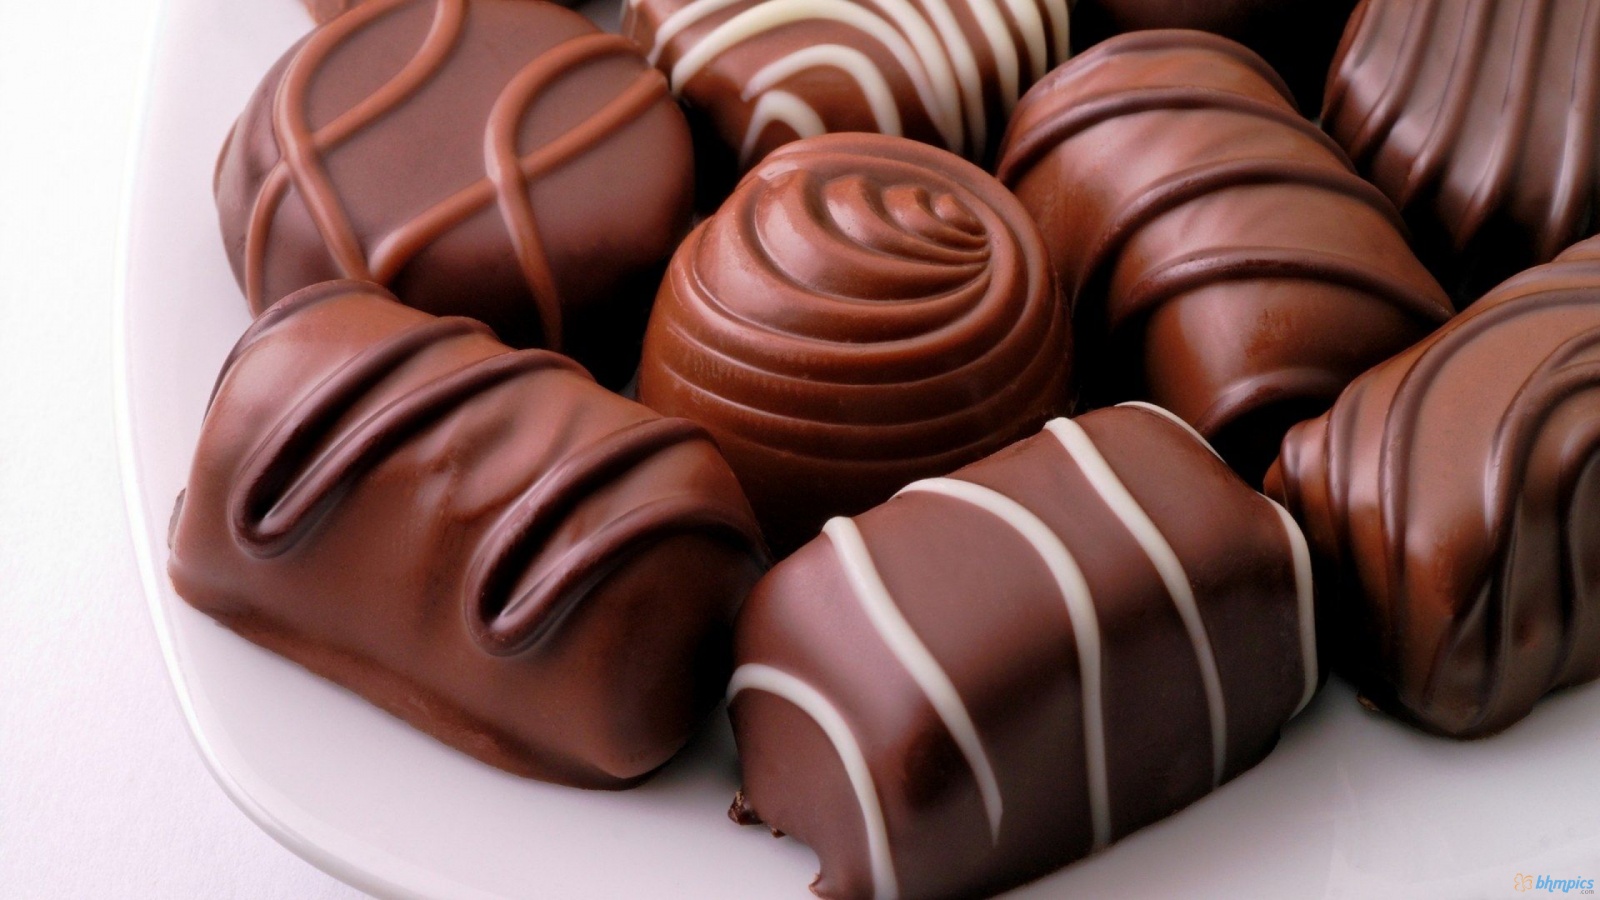 Sweet Chocolate Candies 1600x900 1599 HD Wallpaper Res 1600x900